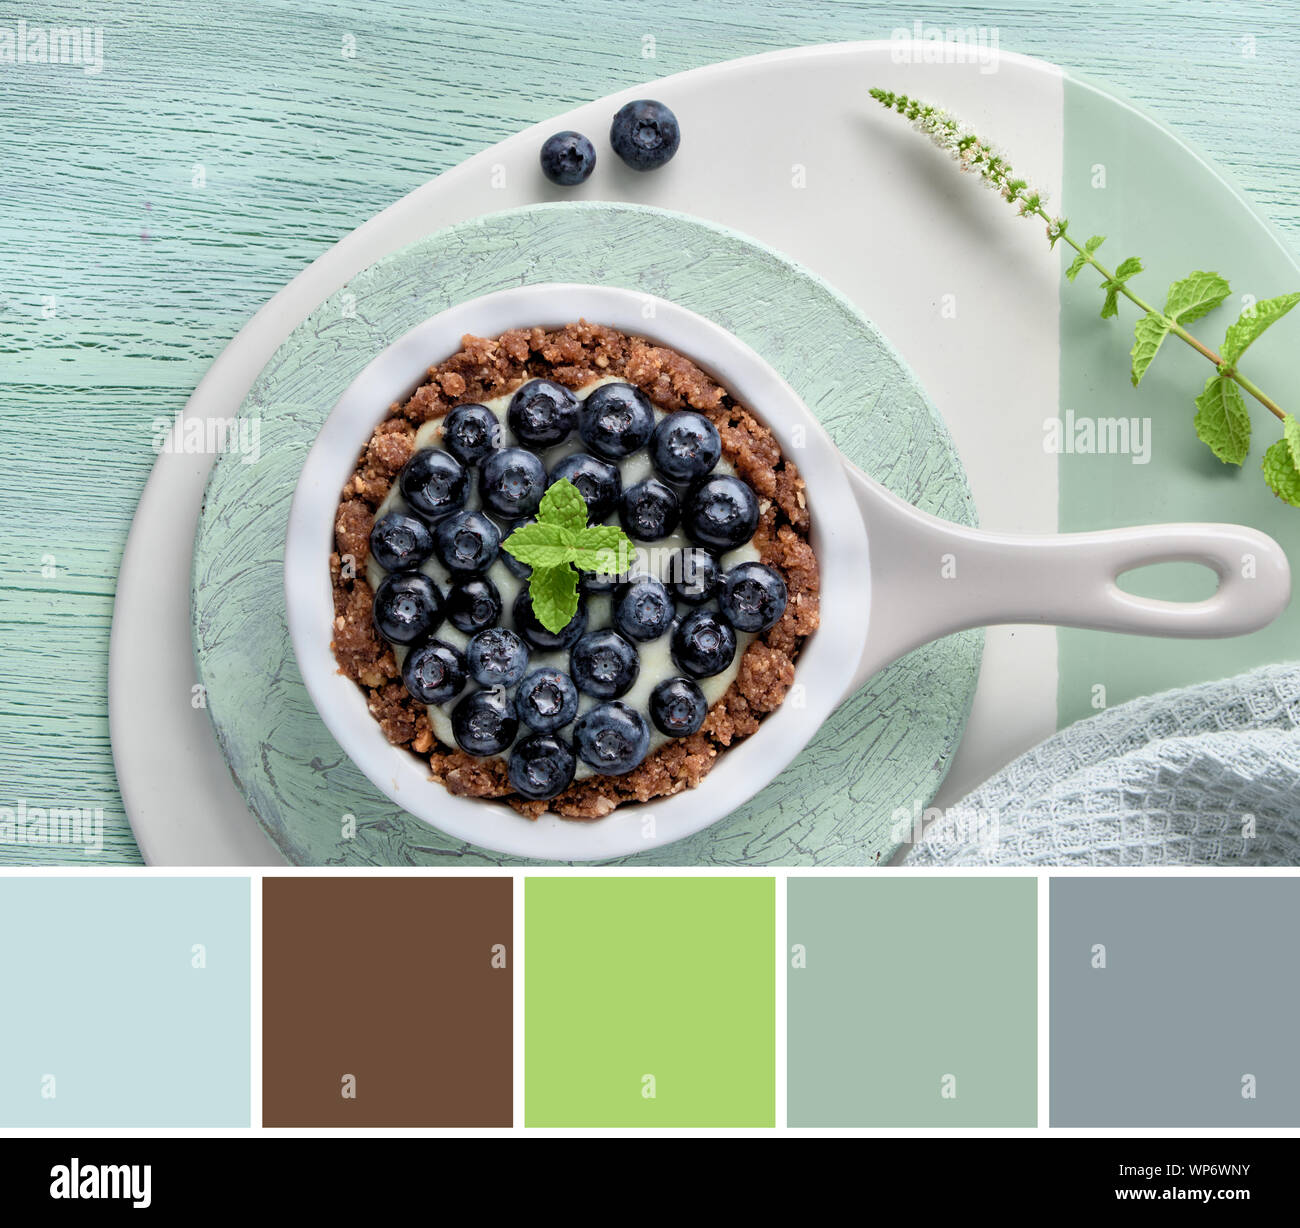 Color matching palette from top view image of blueberry tart on crackled mint background Stock Photo